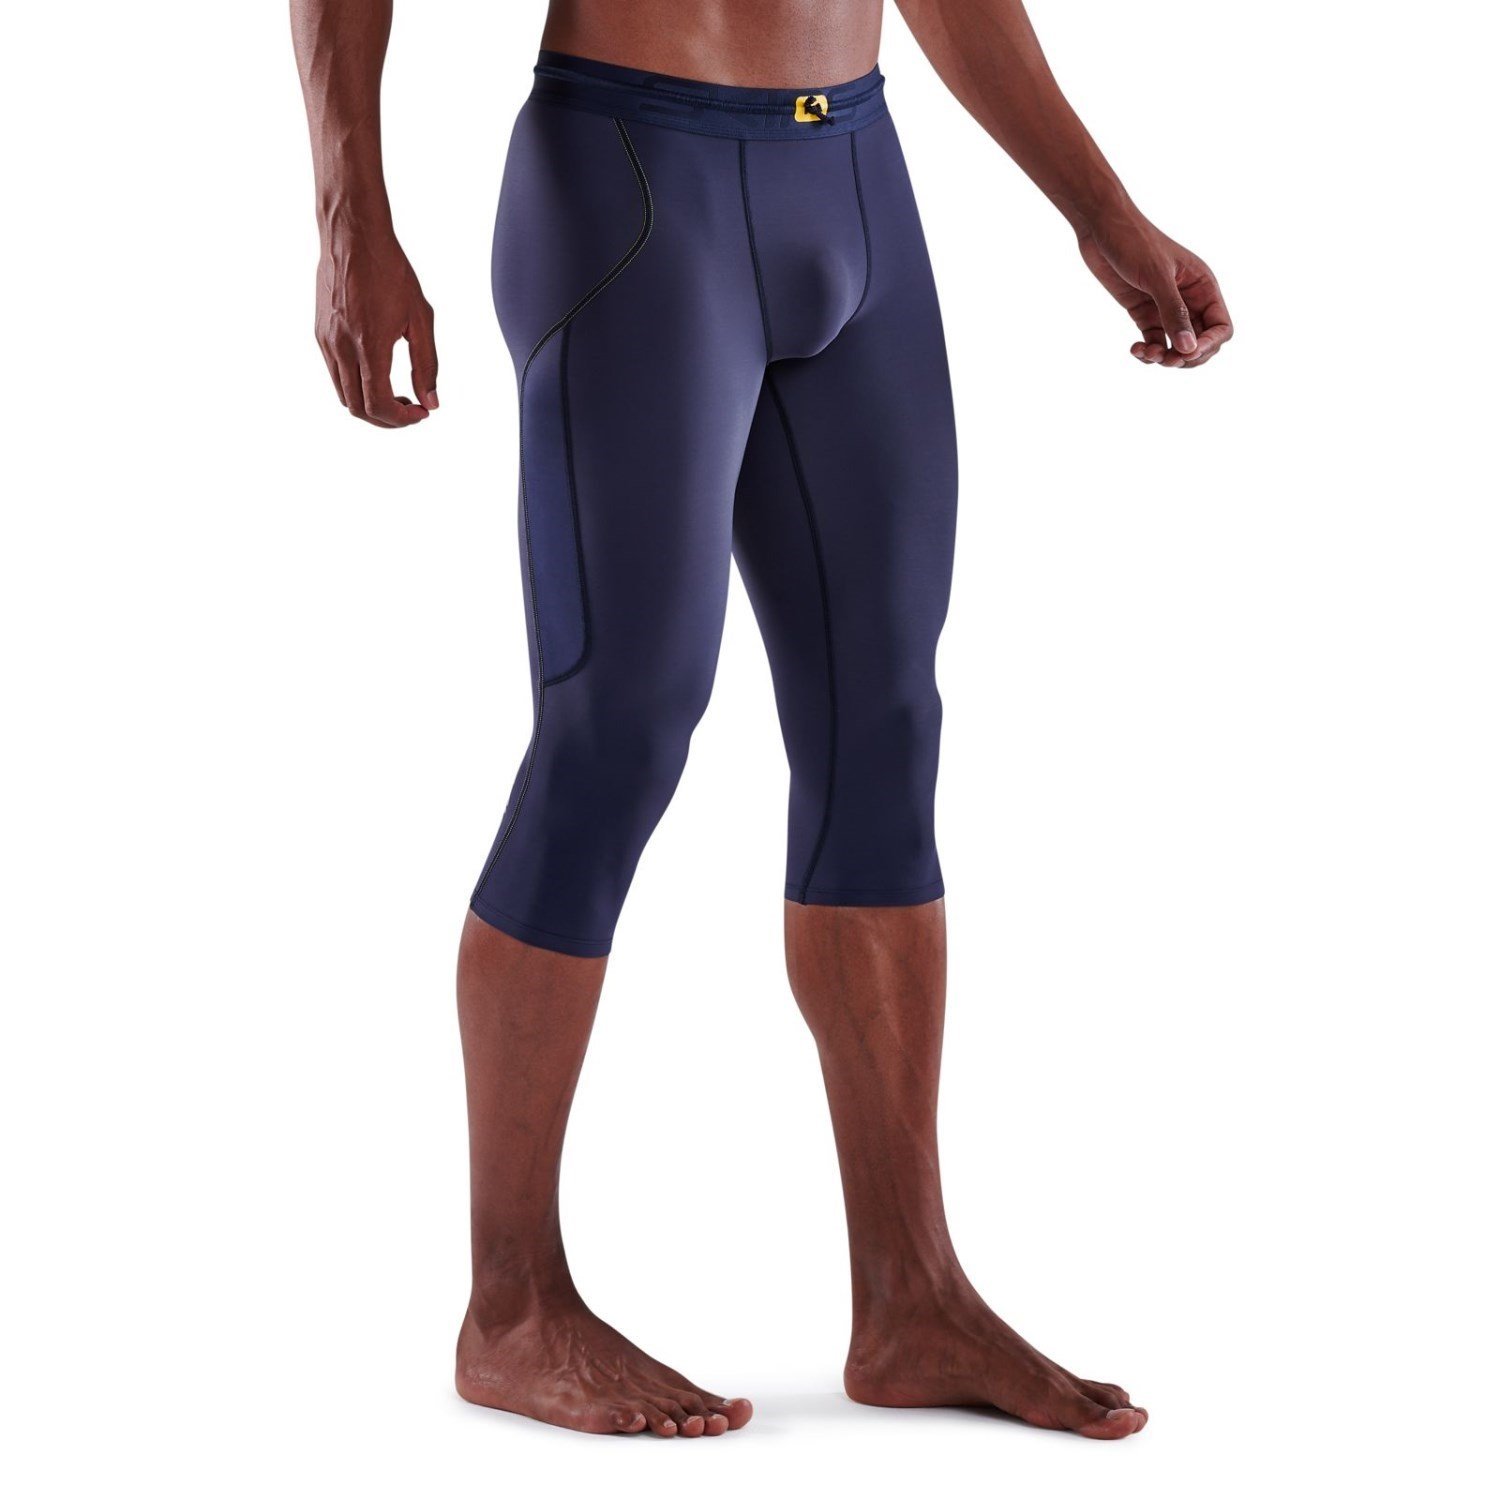 Skins Series-3 Thermal Mens 3/4 Compression Tights - Navy | Sportitude